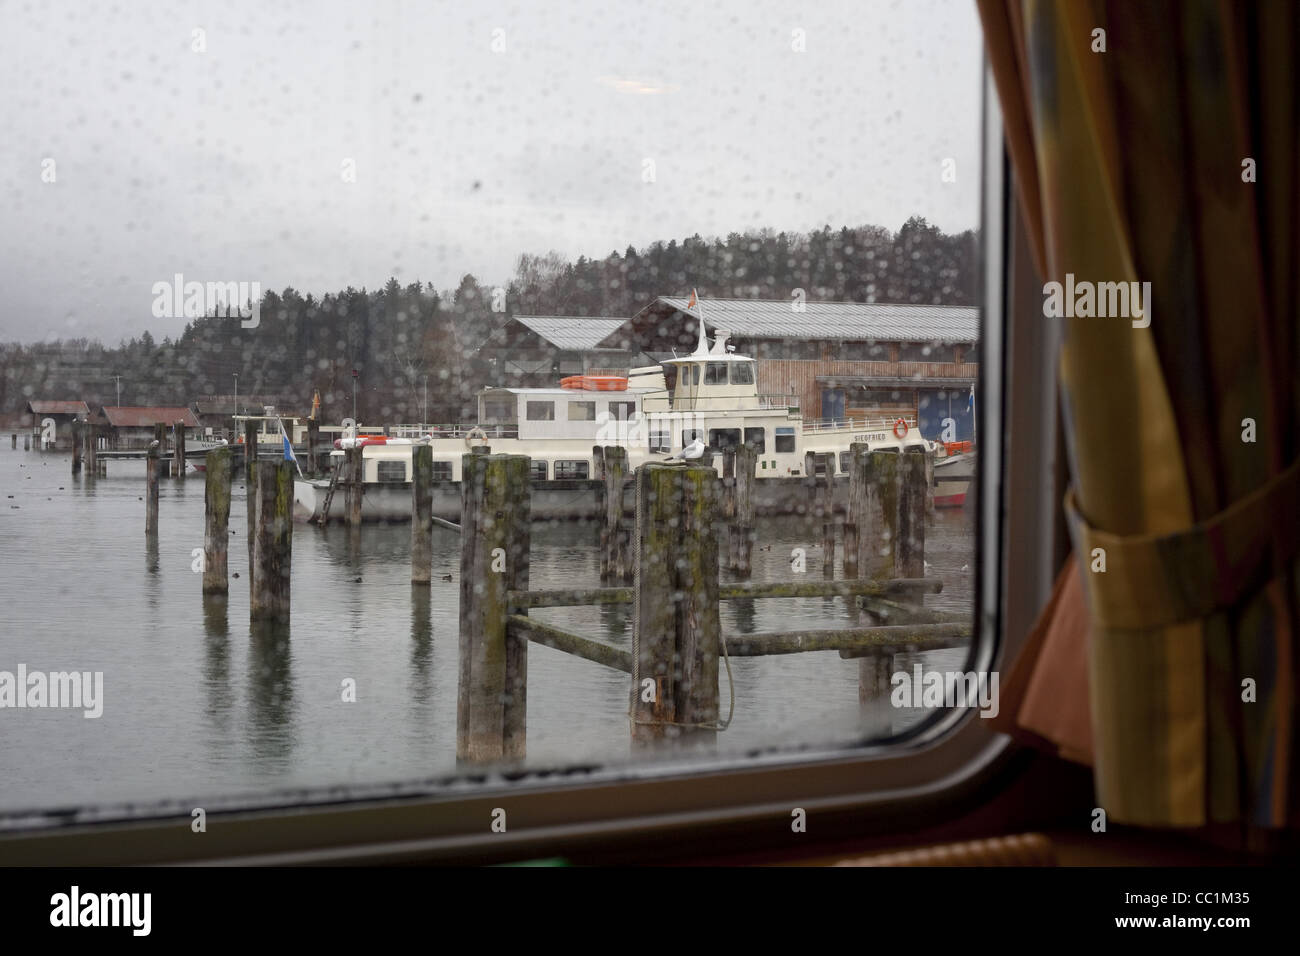 Horizontal image of the boat docks on the Chimsee lake, from the window of the ferry on a rainy Winter afternoon. Stock Photo